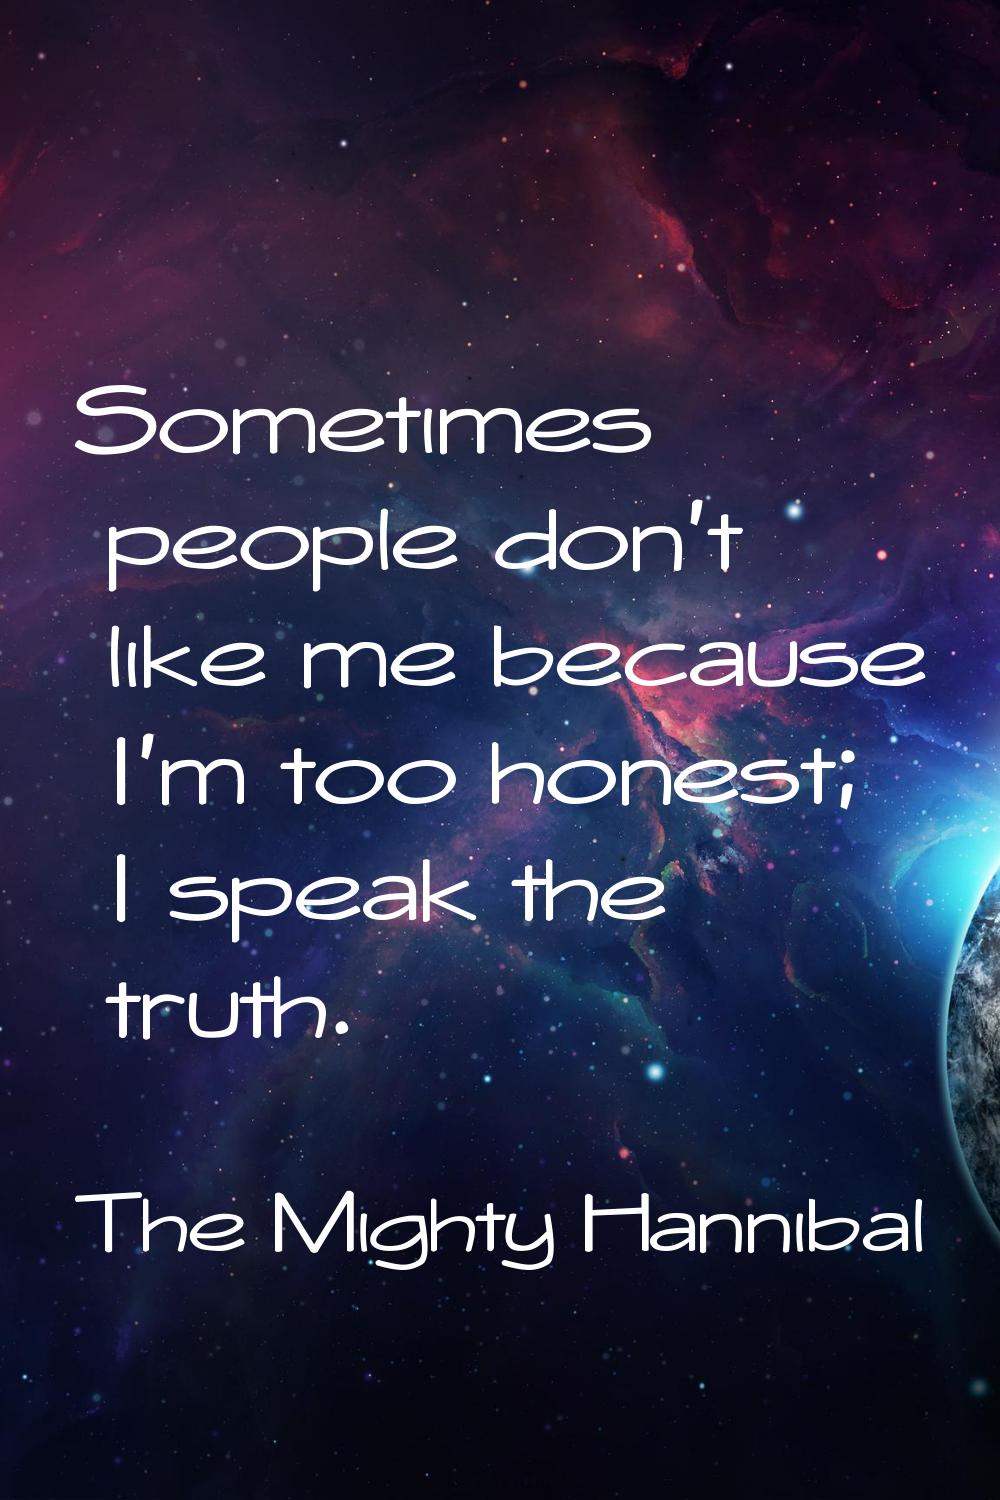 Sometimes people don't like me because I'm too honest; I speak the truth.